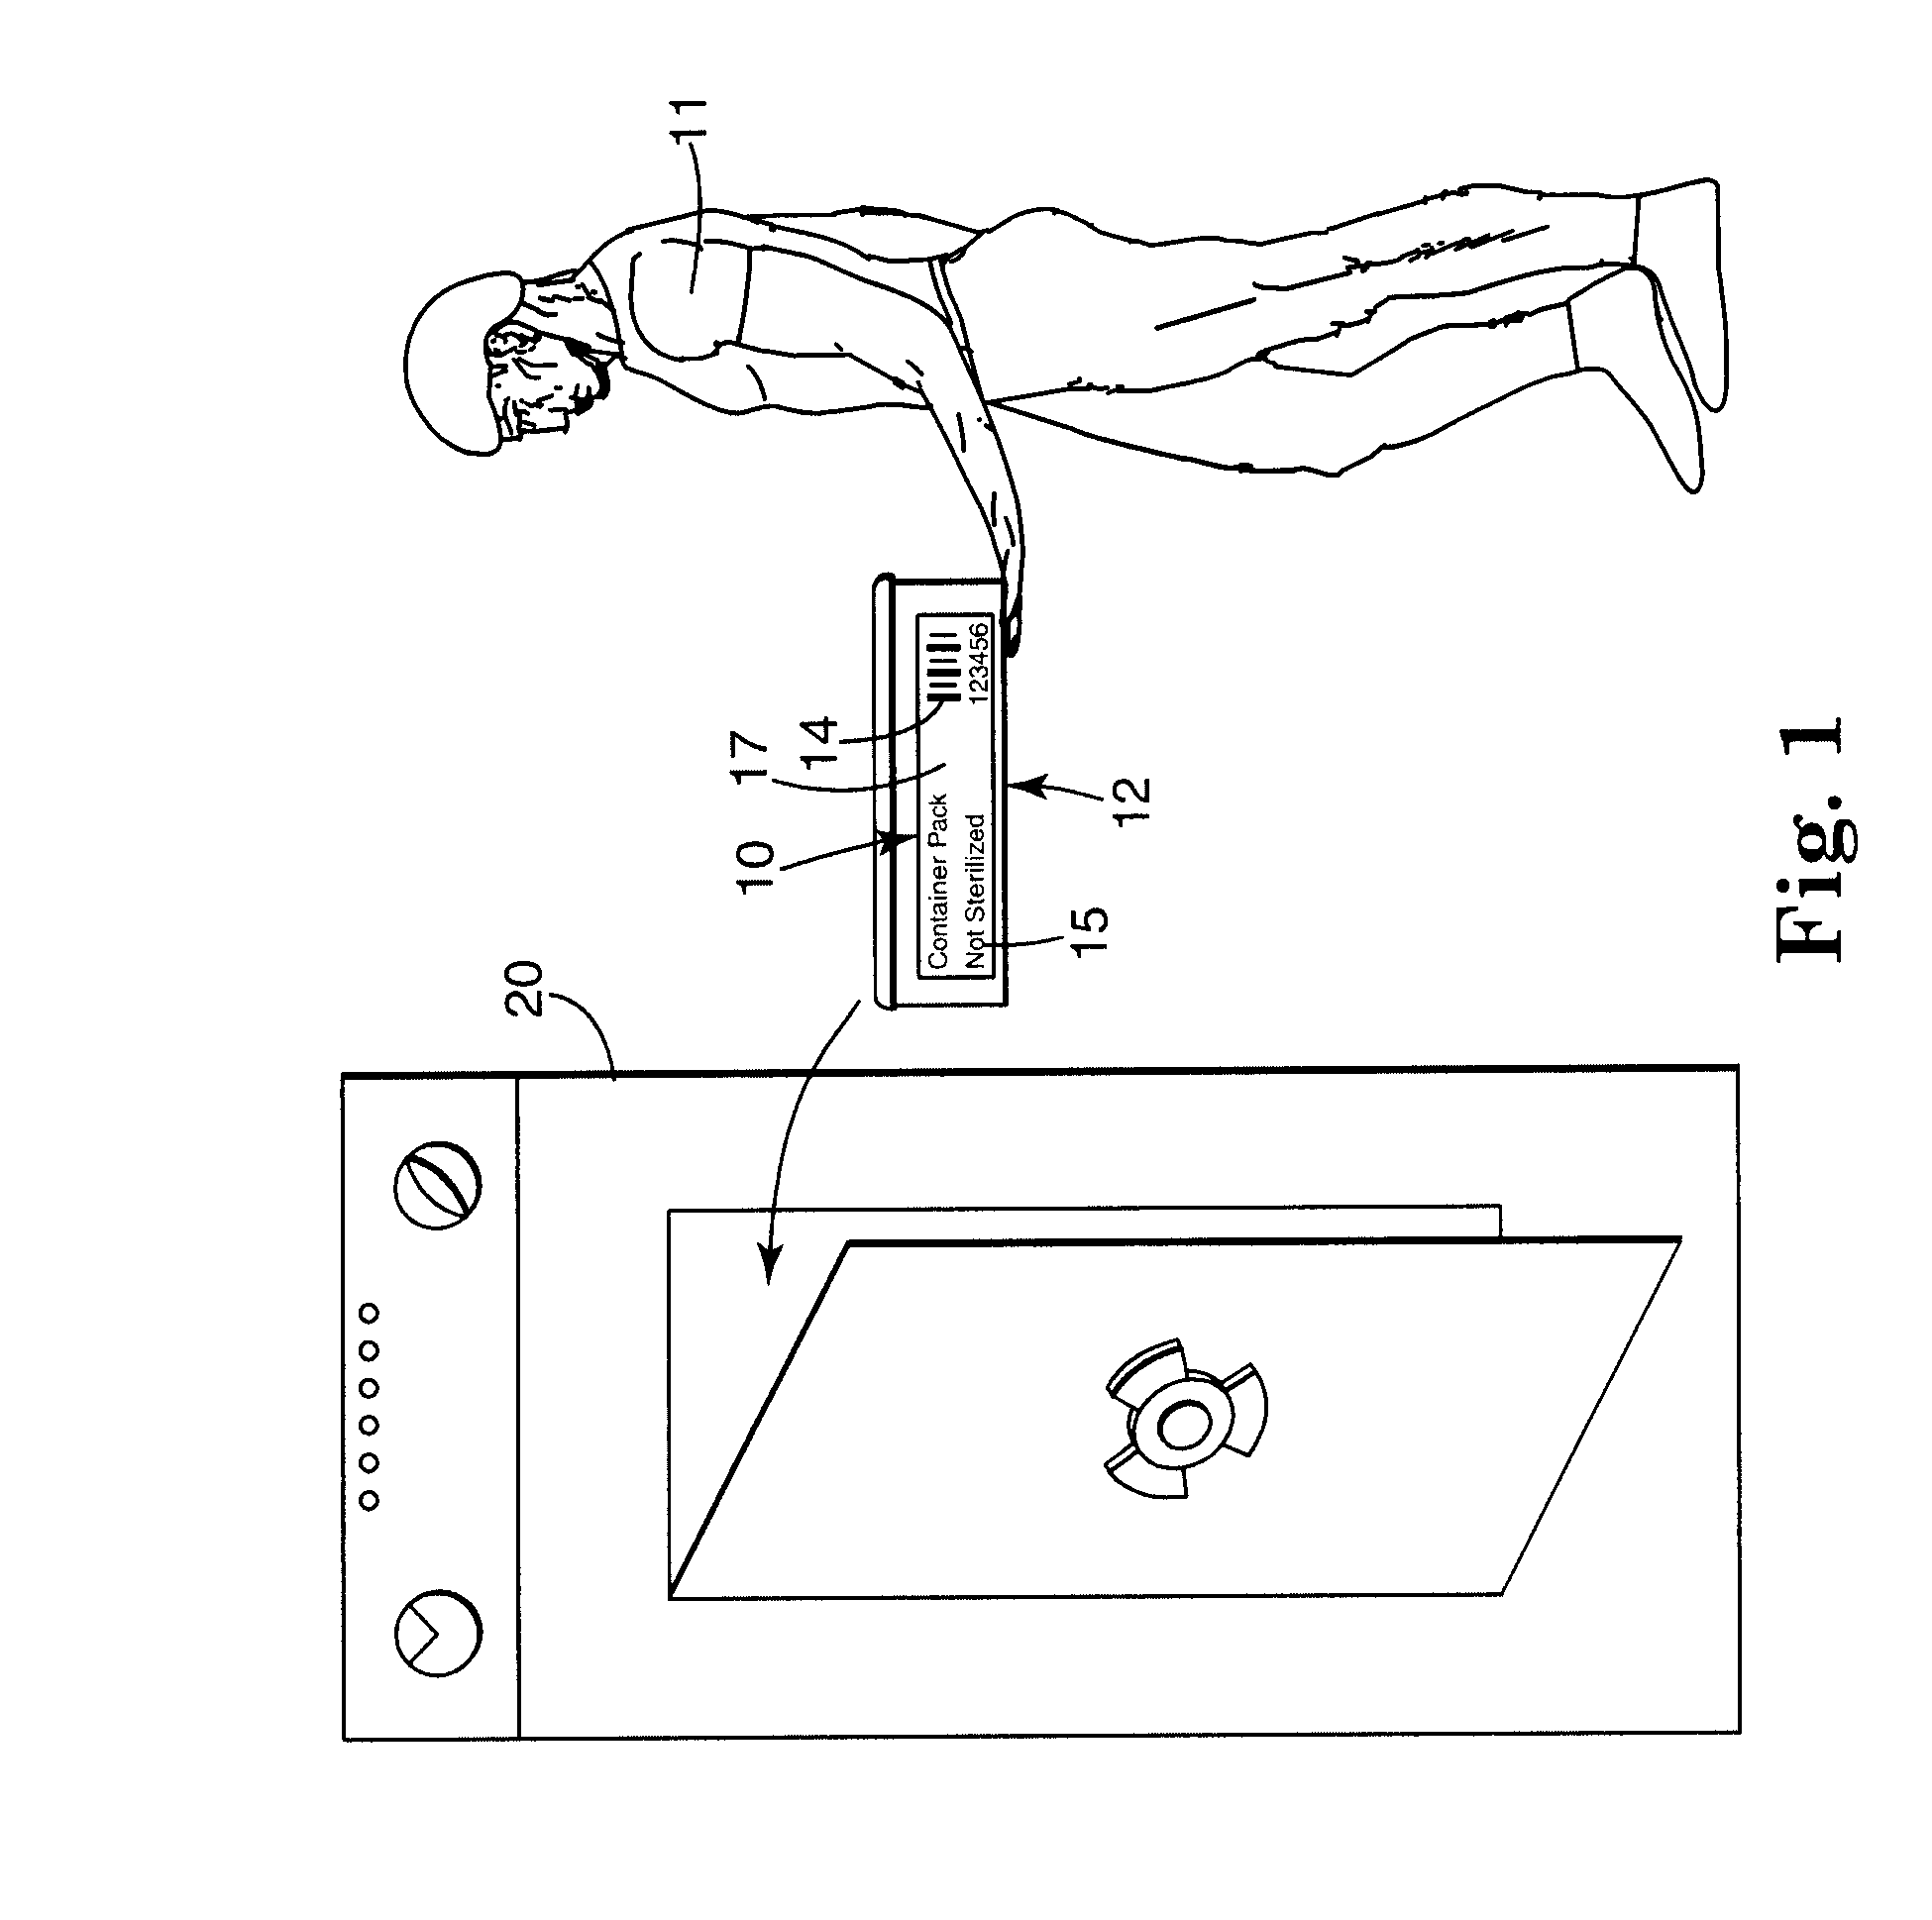 Electronic system for tracking and monitoring articles to be sterilized and associated method